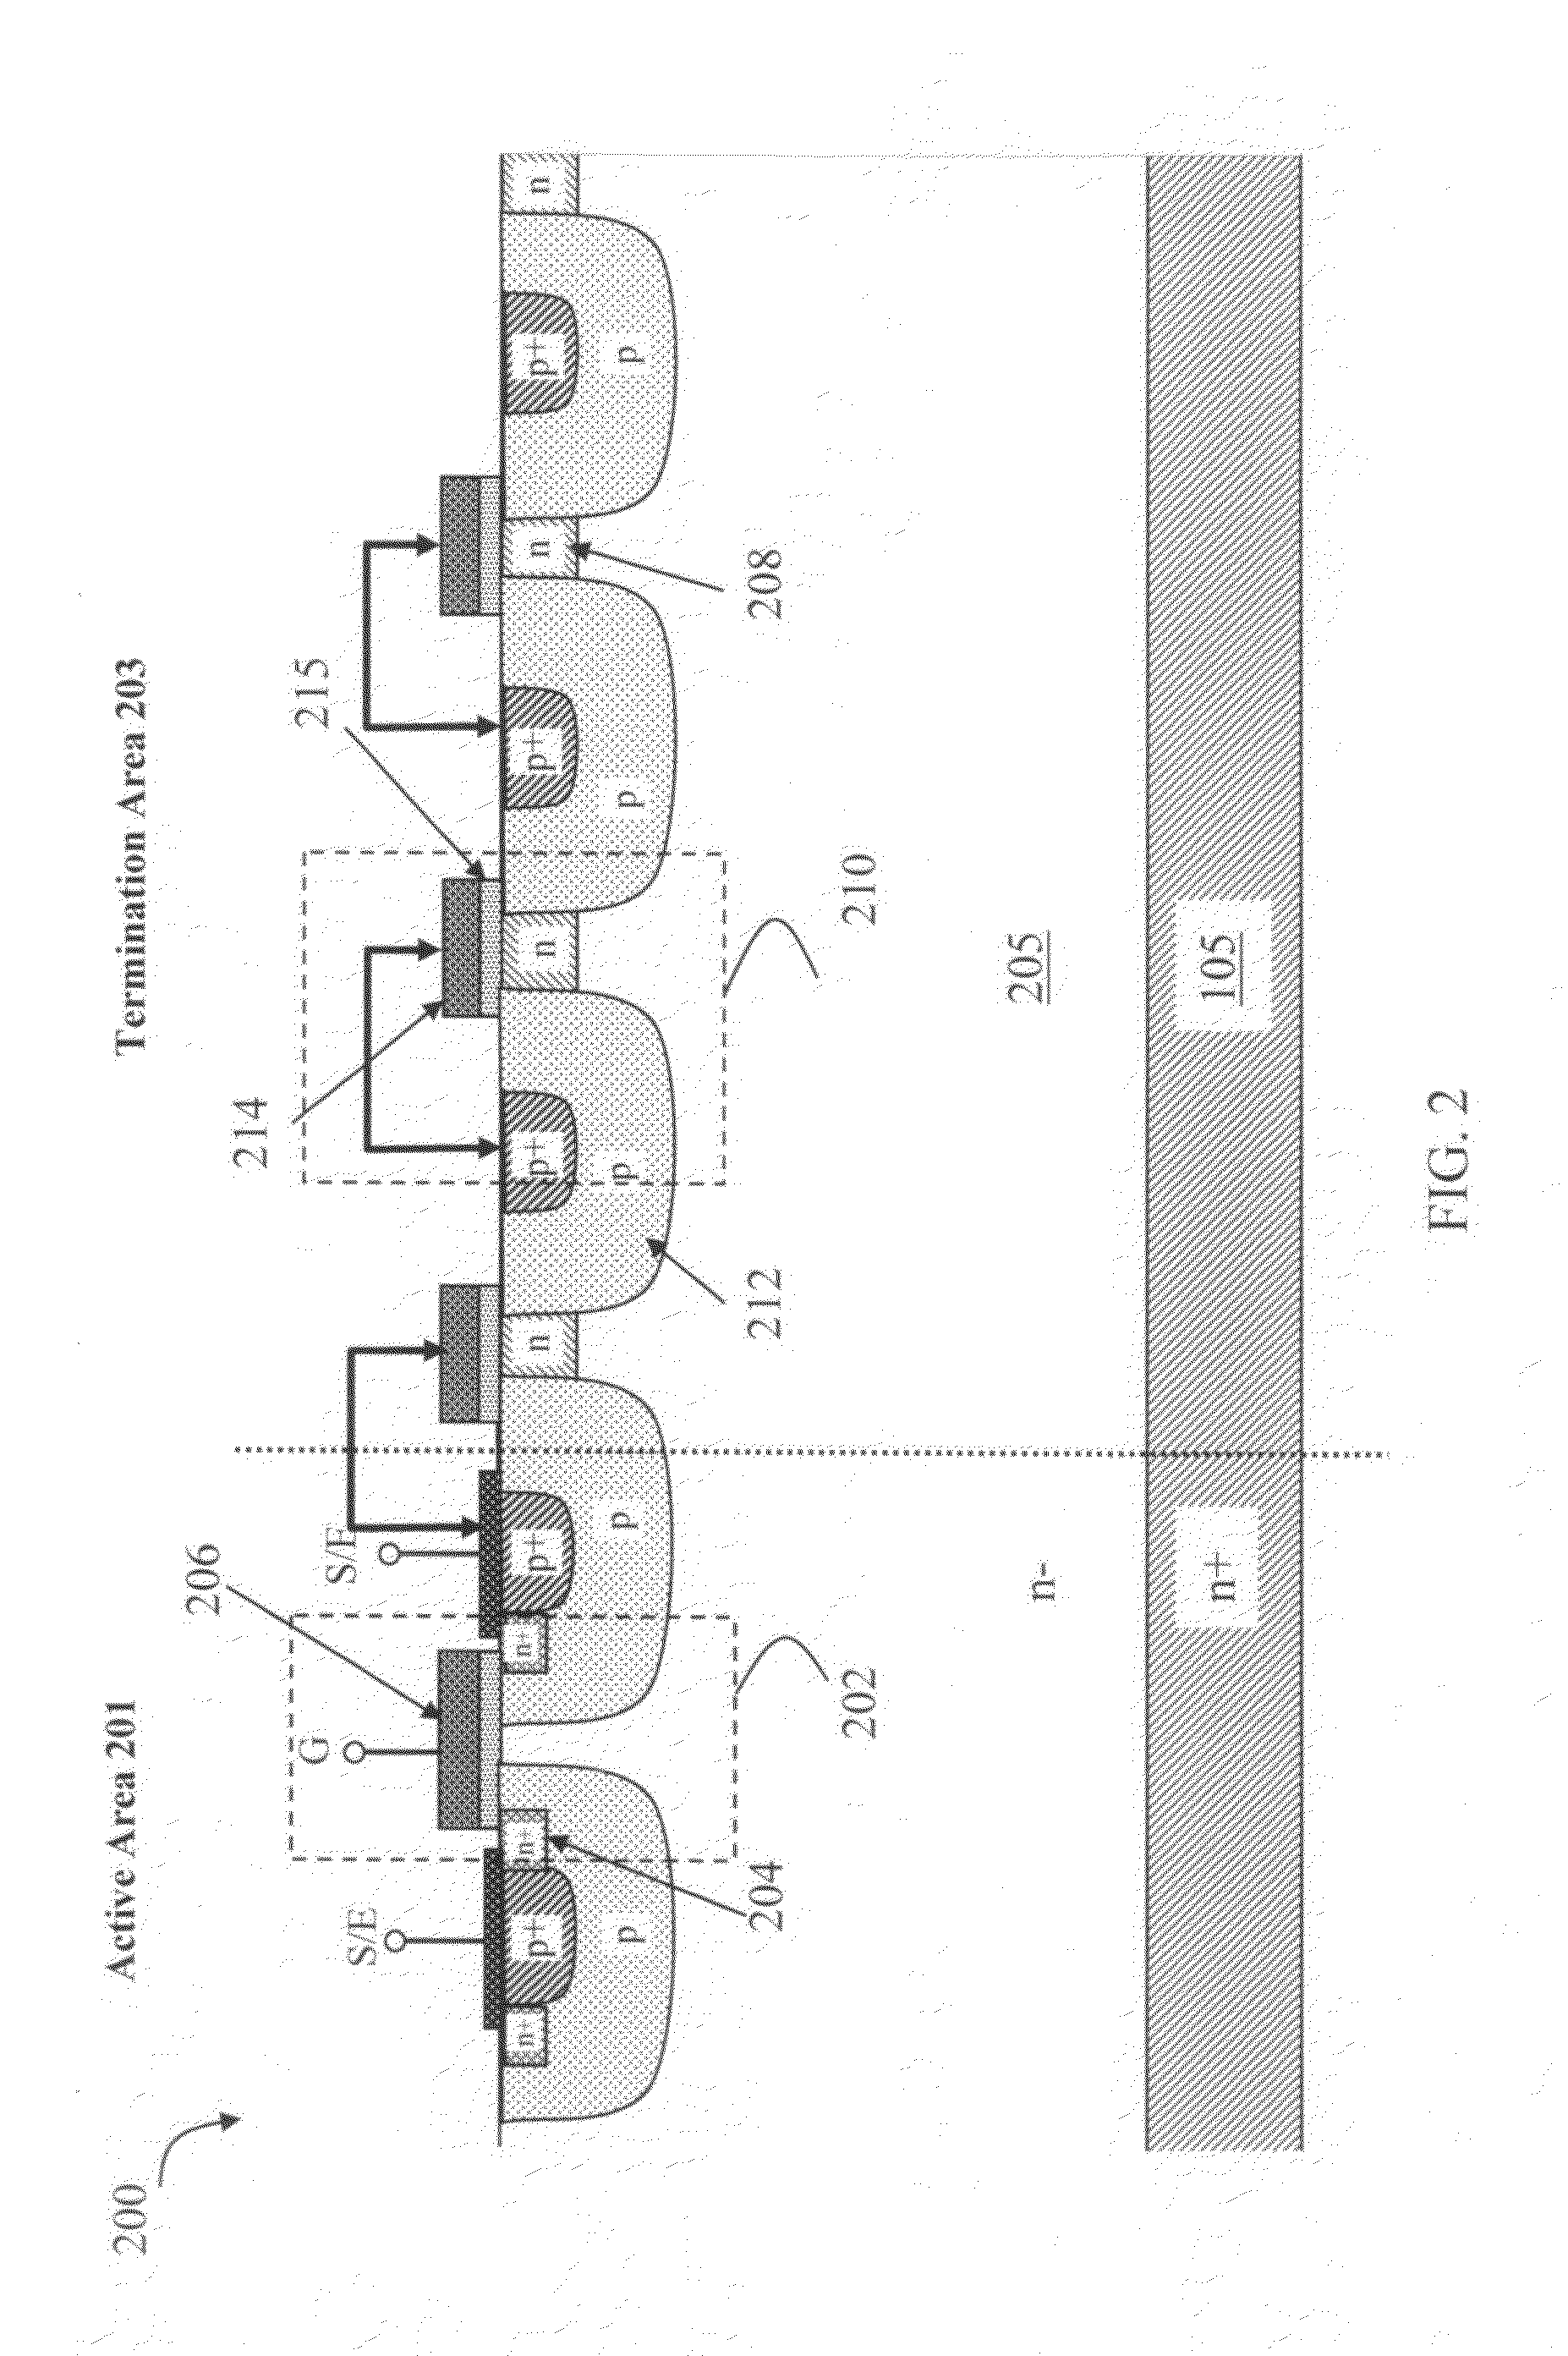 Semiconductor device with field threshold MOSFET for high voltage termination